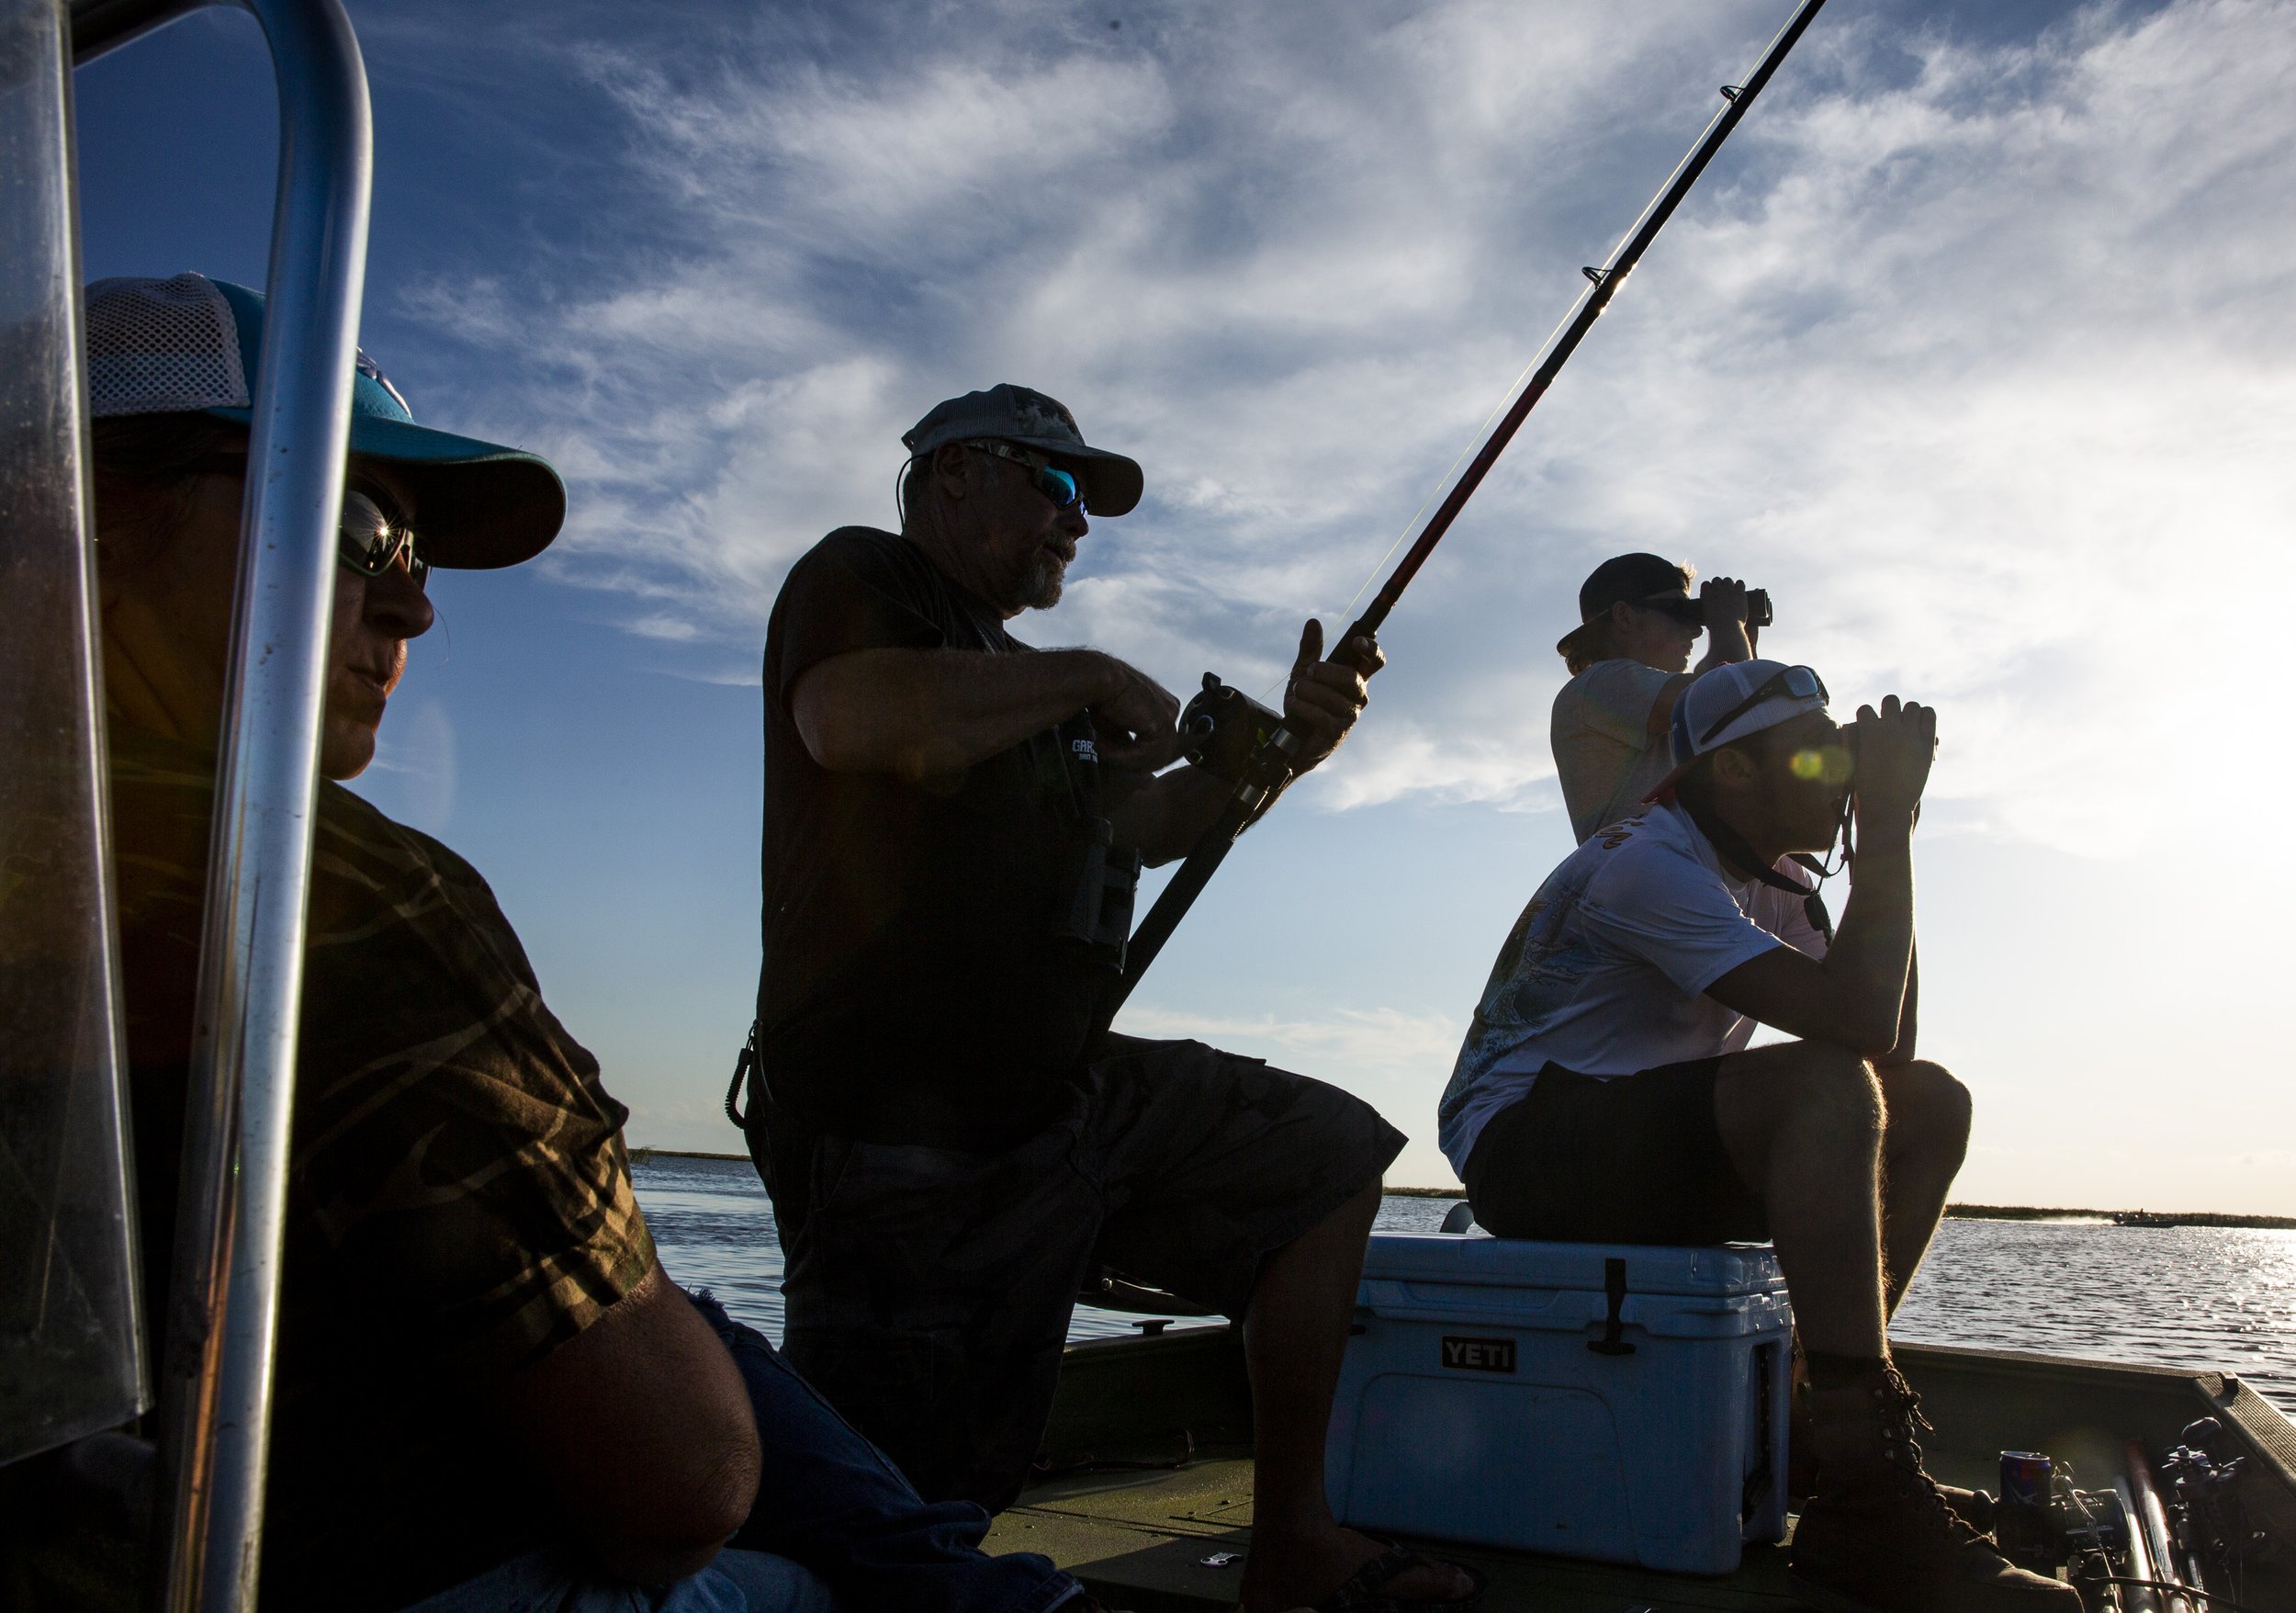  Capt. Bob Stafford, center, works on reeling in a fishing line during an alligator hunt with Okeechobee Charters on Lake Okeechobee Friday, Sept. 27, 2019. 